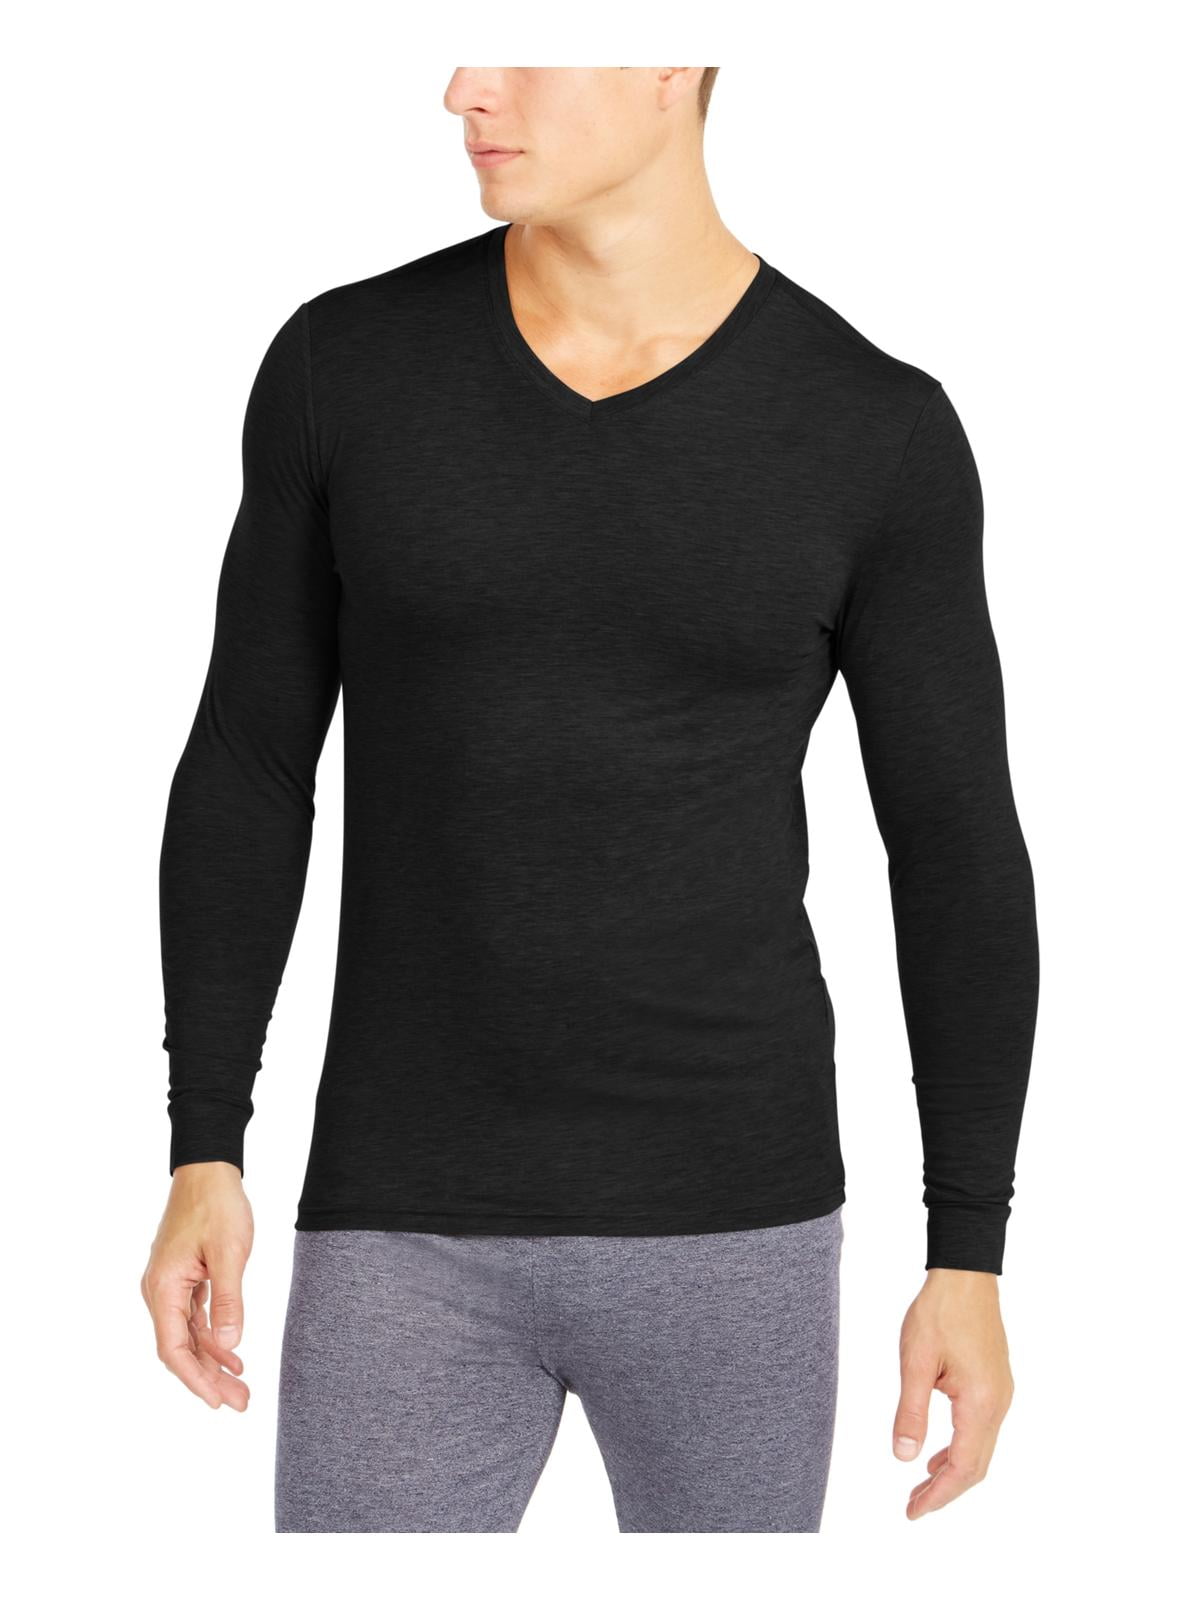 Oxford Layers Warm Dry Thermal High Neck Top base layers for Bike Ski/ Cycle 